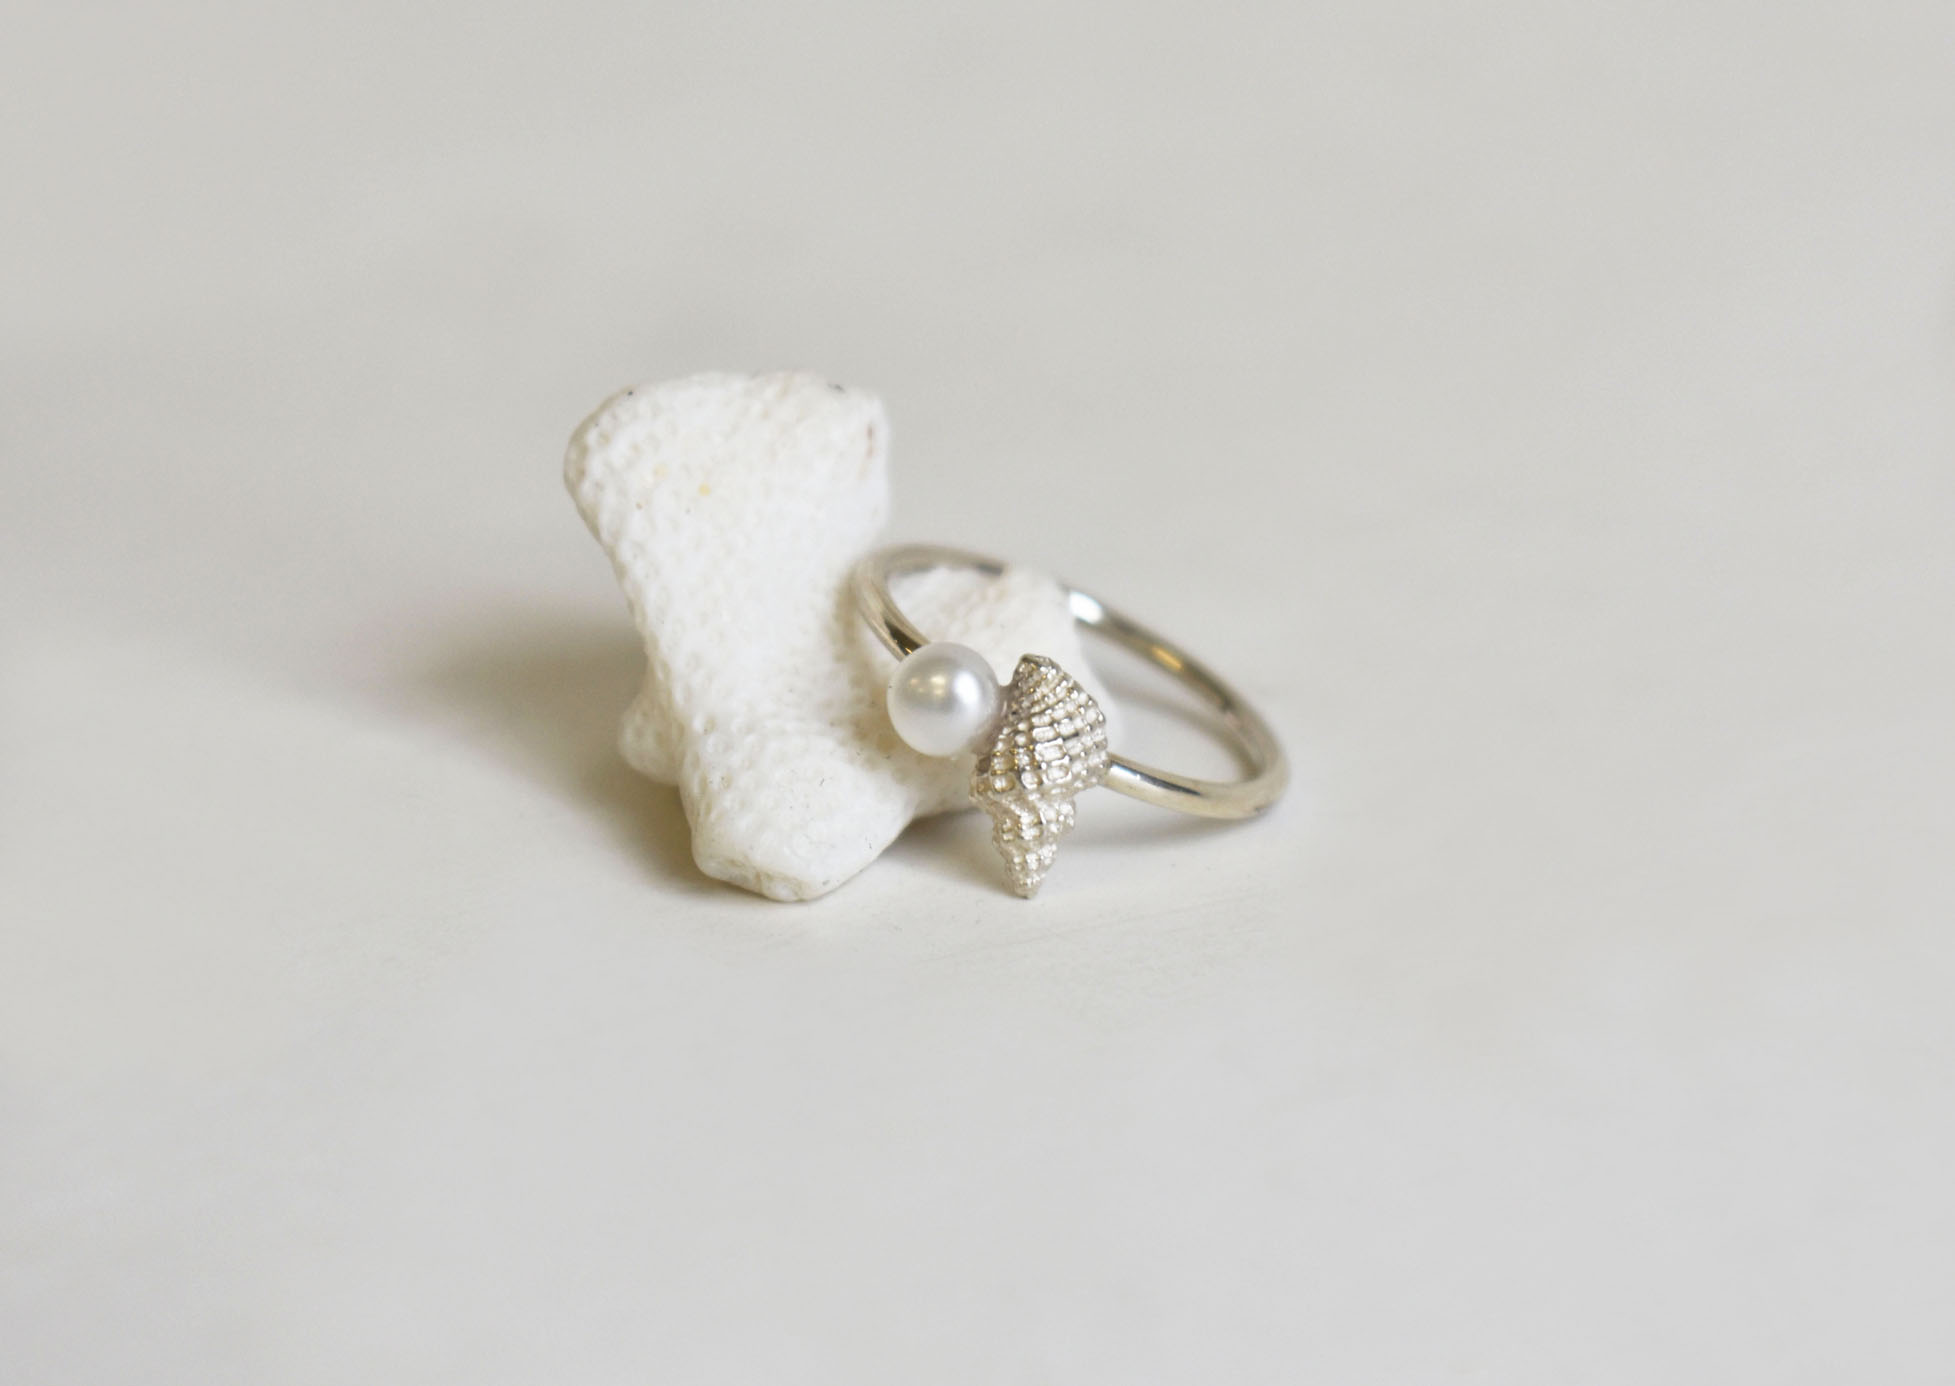 Baby conch pearl ring 1 k